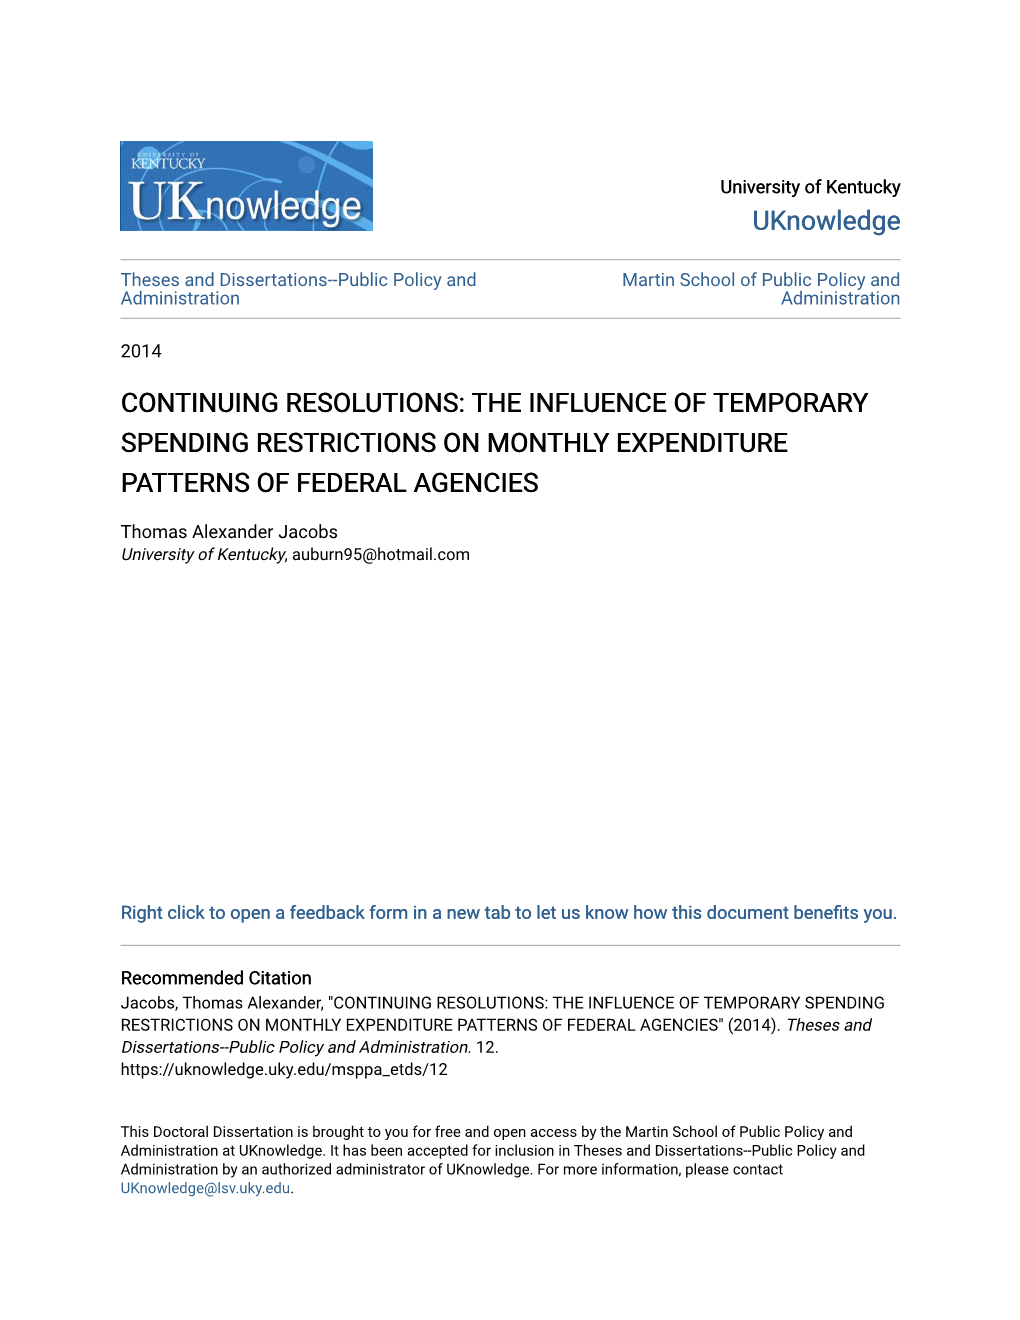 Continuing Resolutions: the Influence of Temporary Spending Restrictions on Monthly Expenditure Patterns of Federal Agencies